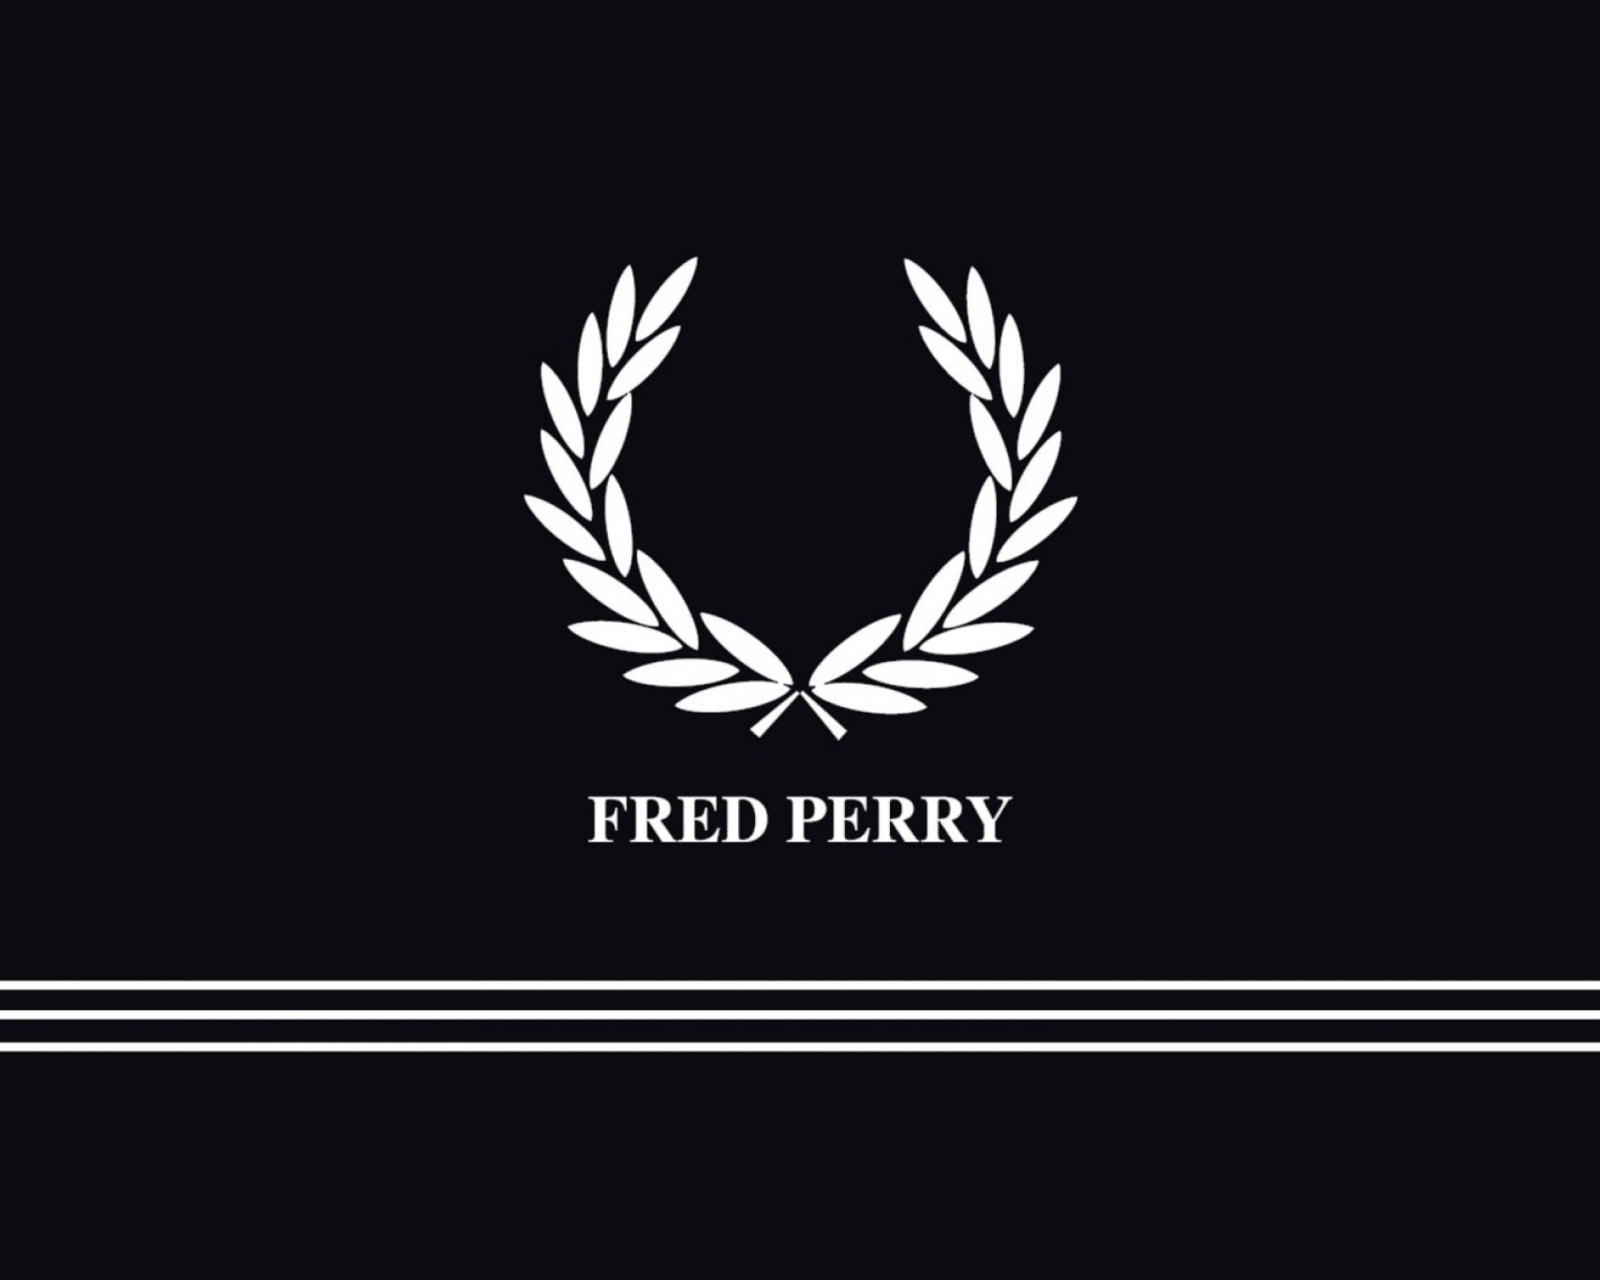 Fred Perry wallpaper 1600x1280